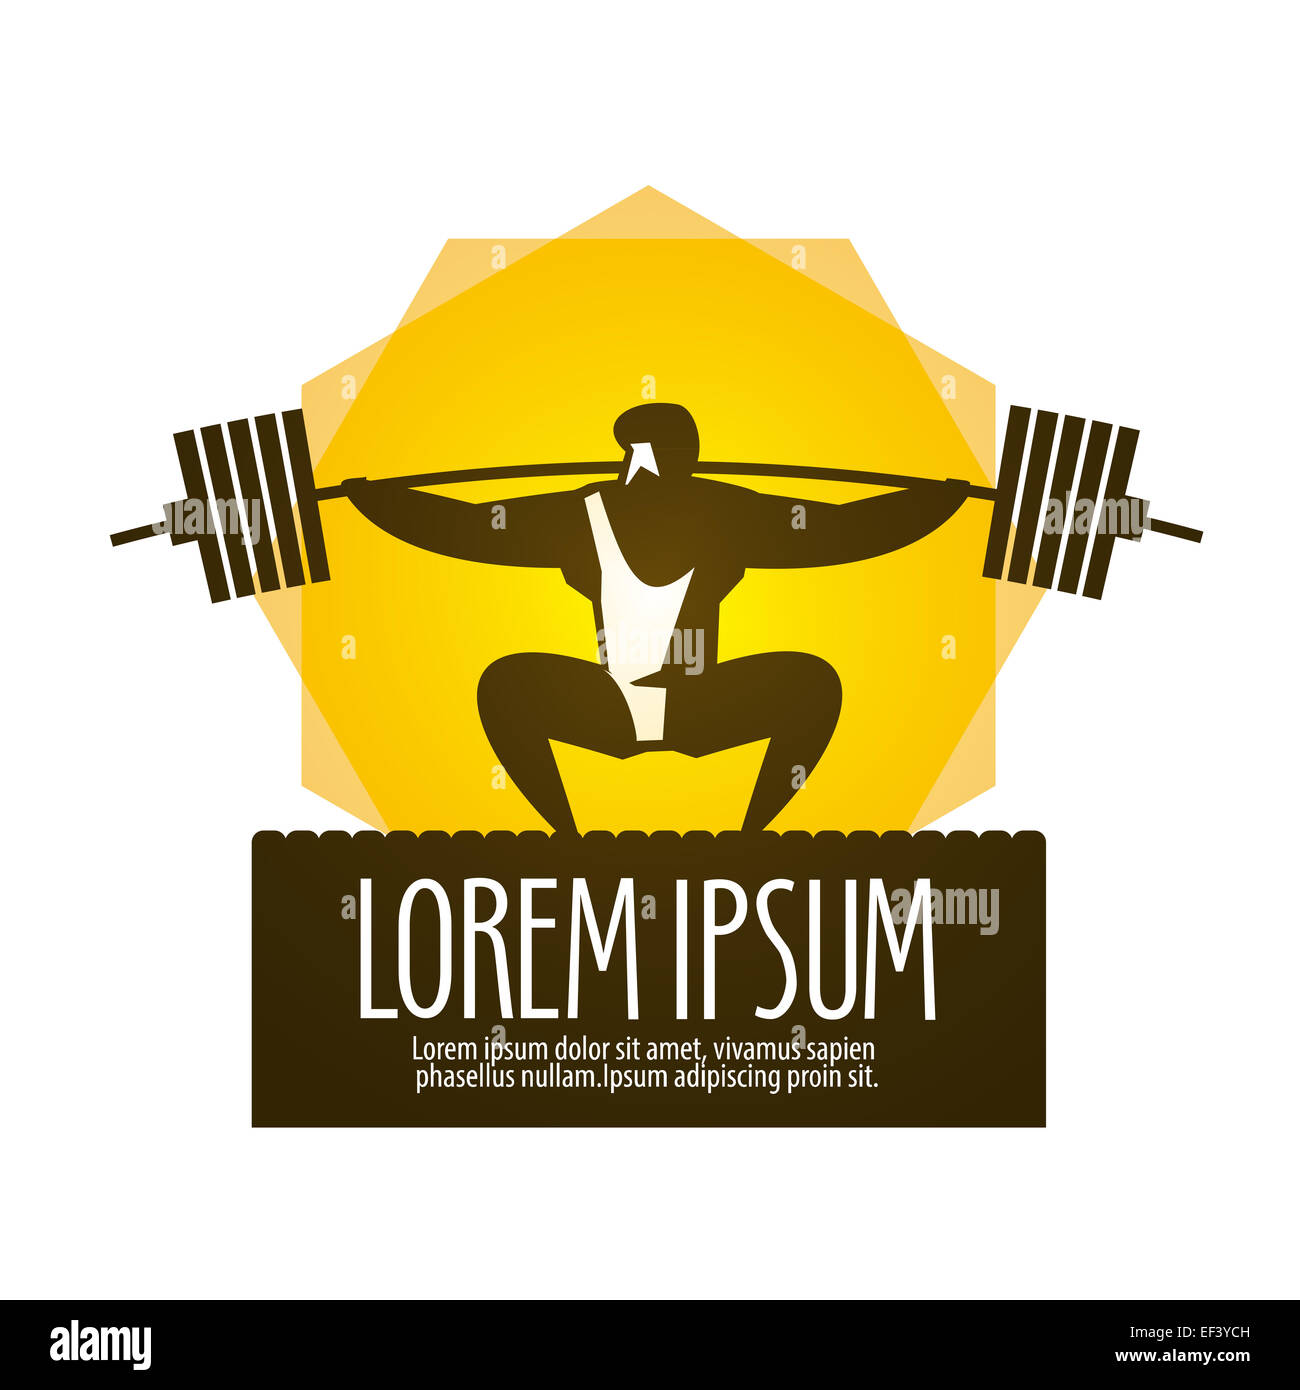 Weight lifter vector logo design template. gym or sports icon. Stock Photo